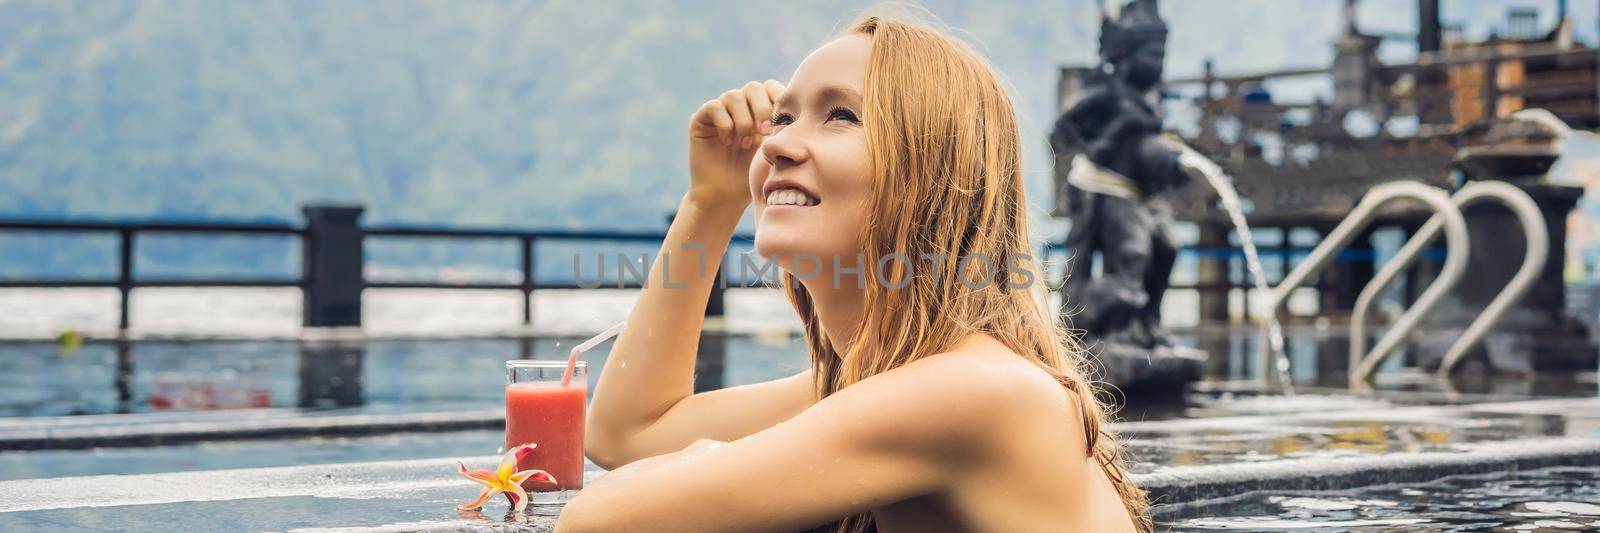 Geothermal spa. Woman relaxing in hot spring pool against the lake. hot springs concept. Drinking guava juice BANNER, LONG FORMAT by galitskaya